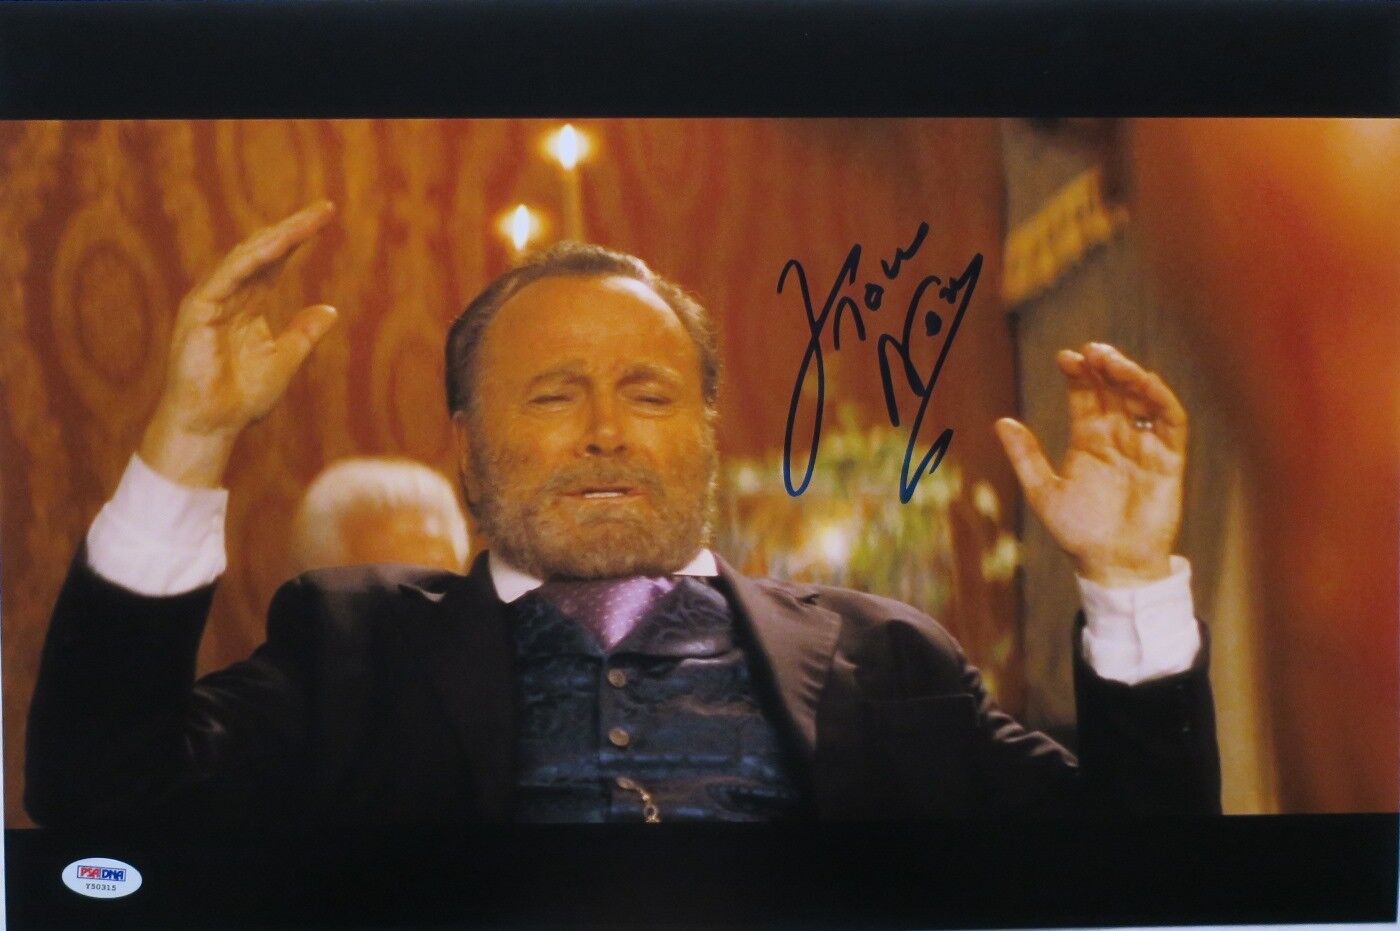 Franco Nero Signed Django Unchained Autographed 12x18 Photo Poster painting PSA/DNA #Y50315